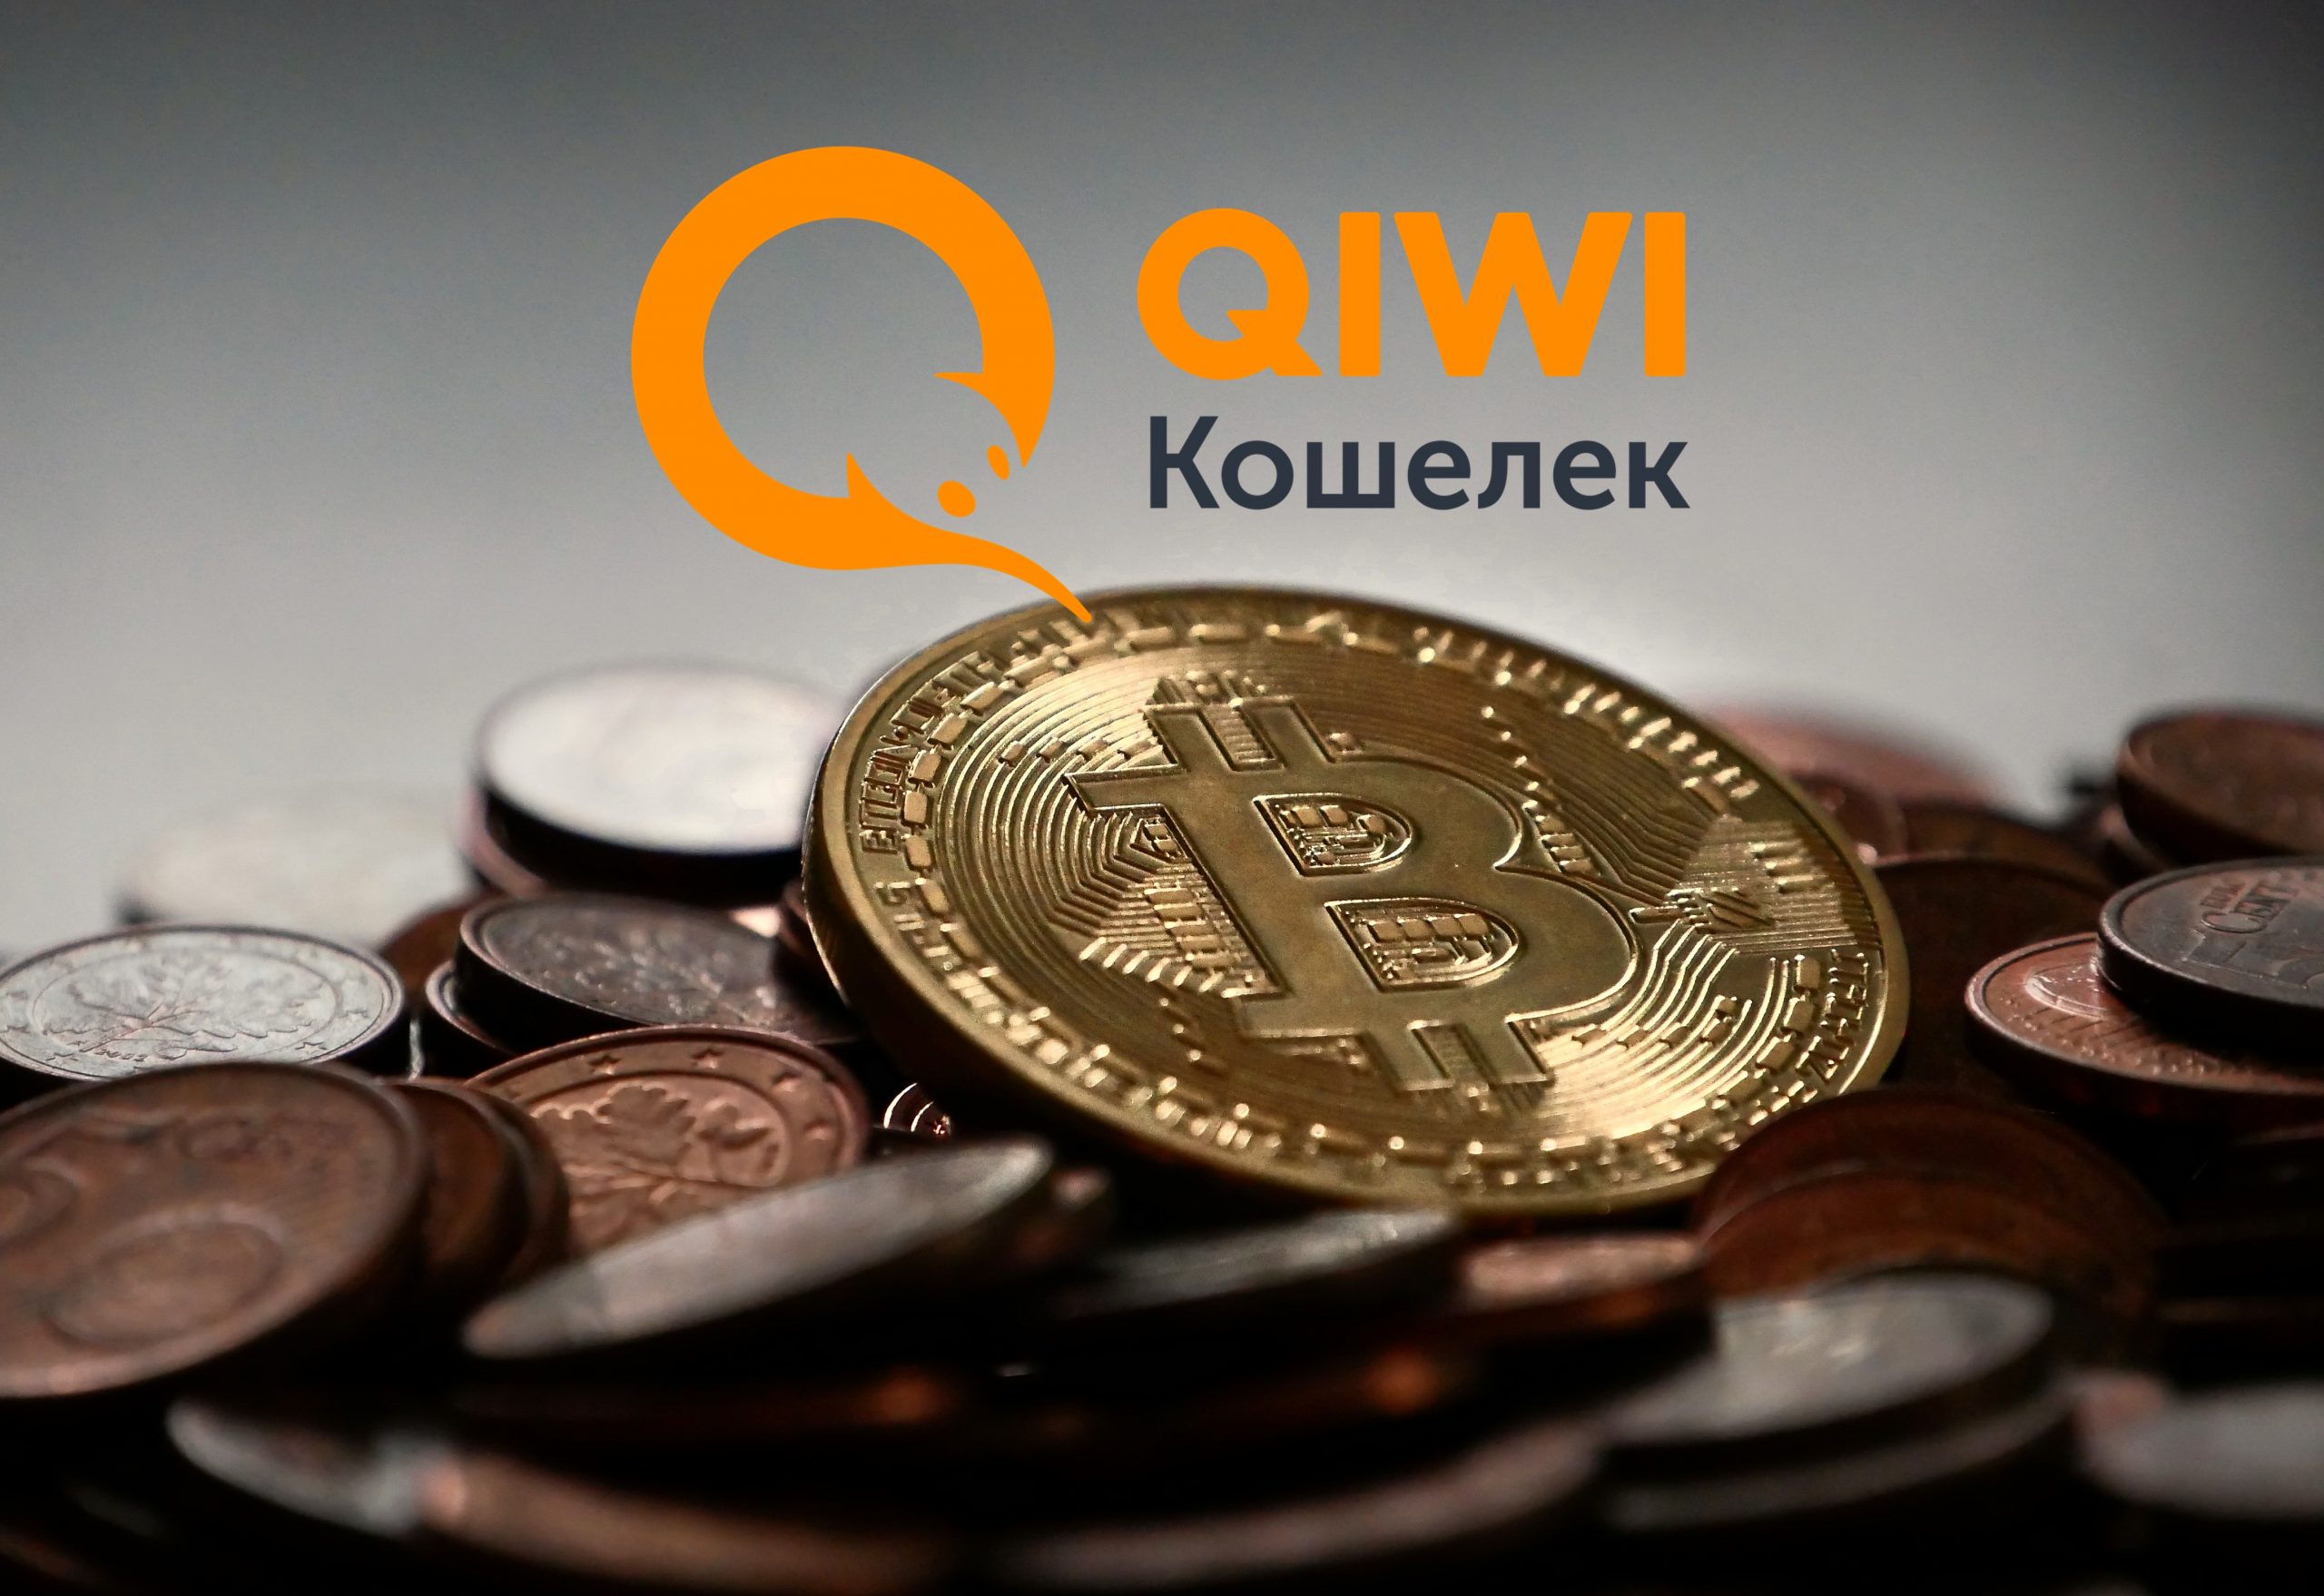 Qiwi кошелек bitcoin crypto wallet how does it work